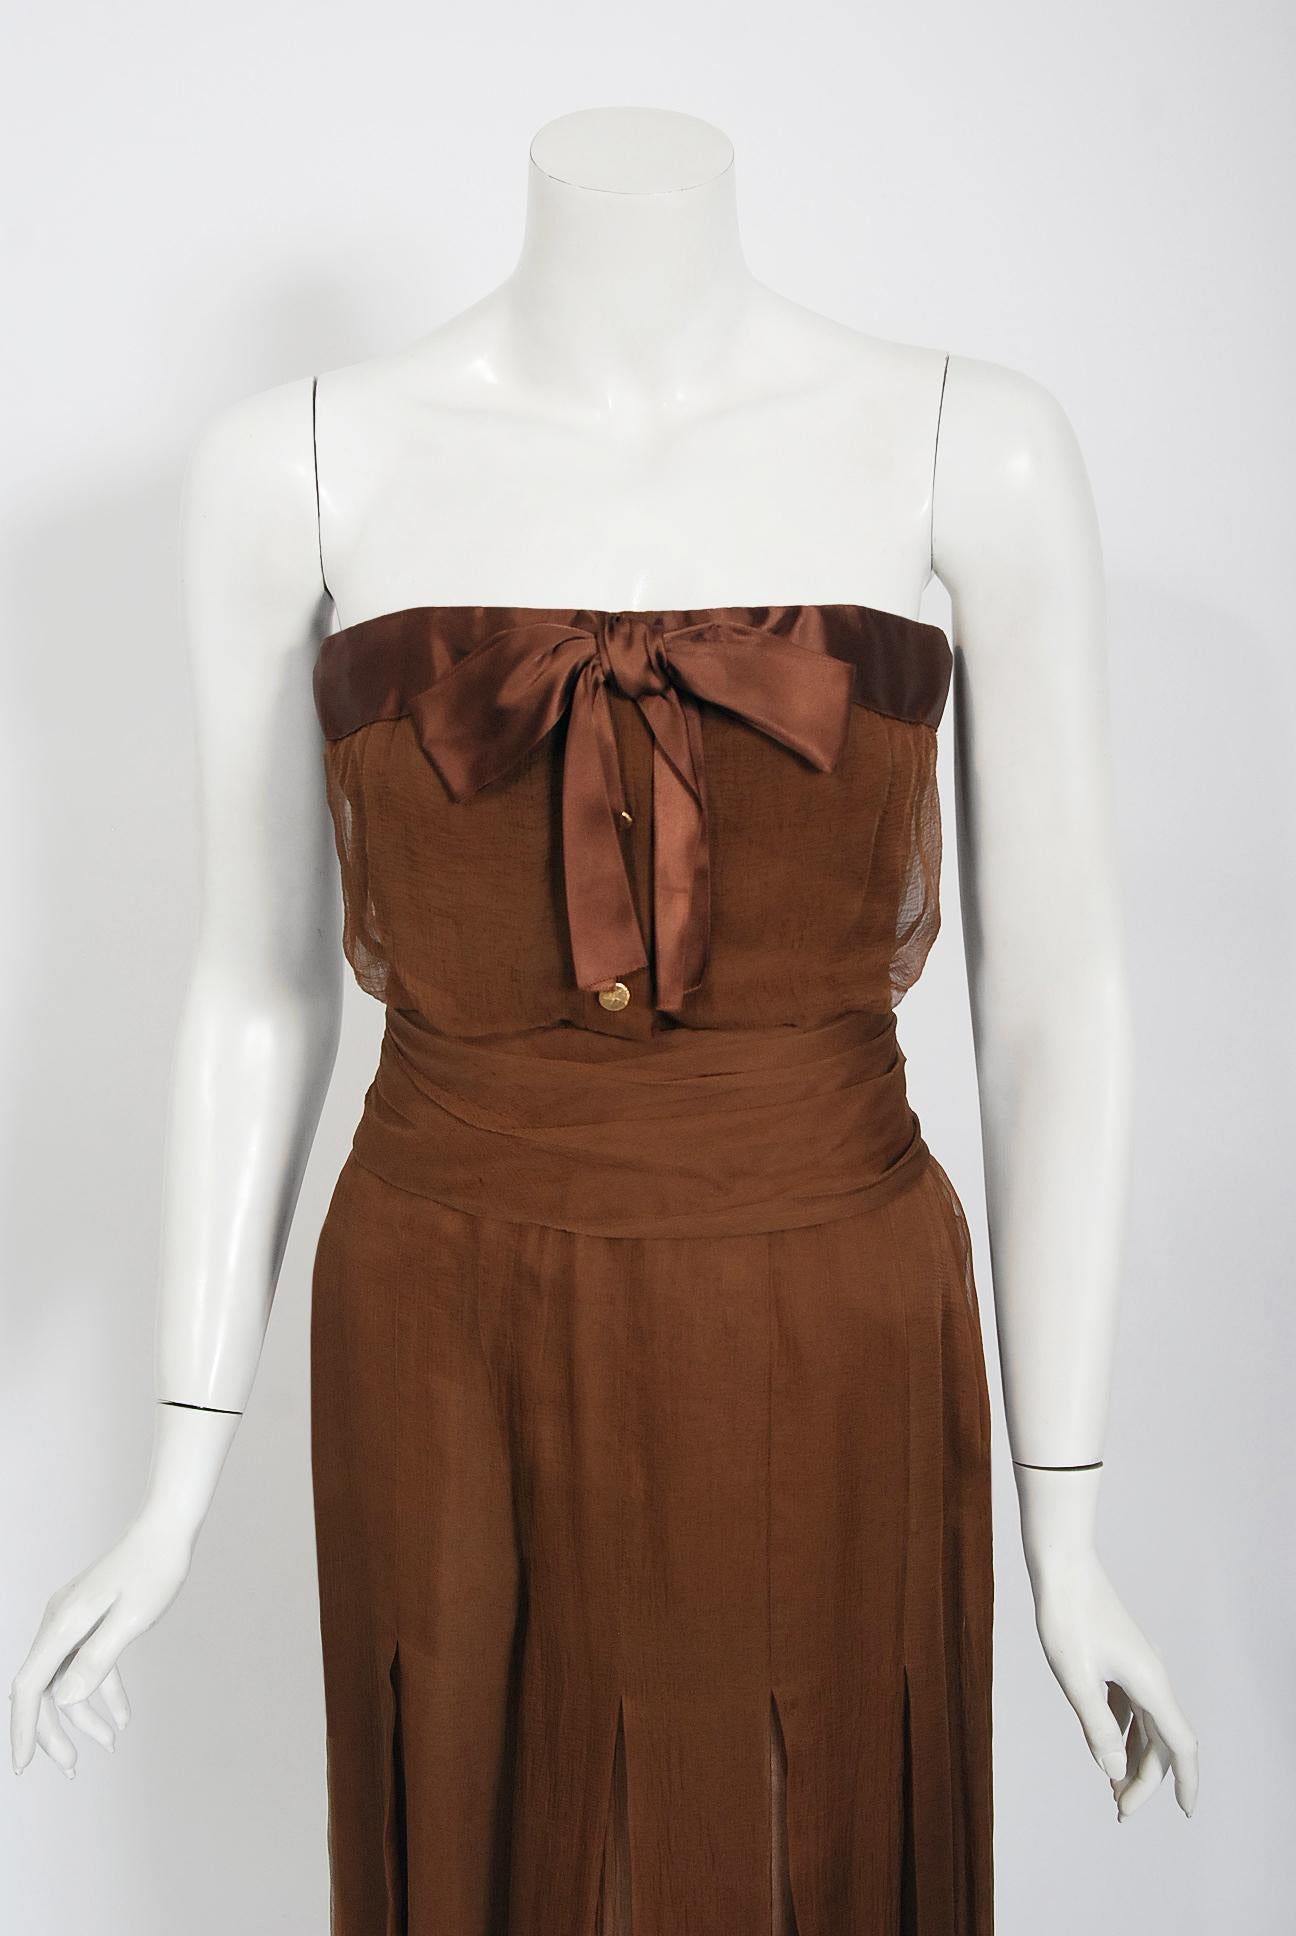 A gorgeous Christian Dior Haute Couture chocolate brown ensemble dating back to their 1972-73 Fall Winter collection. When the talented Marc Bohan took over as head designer in 1960, he continued the Dior tradition of elegant design and this